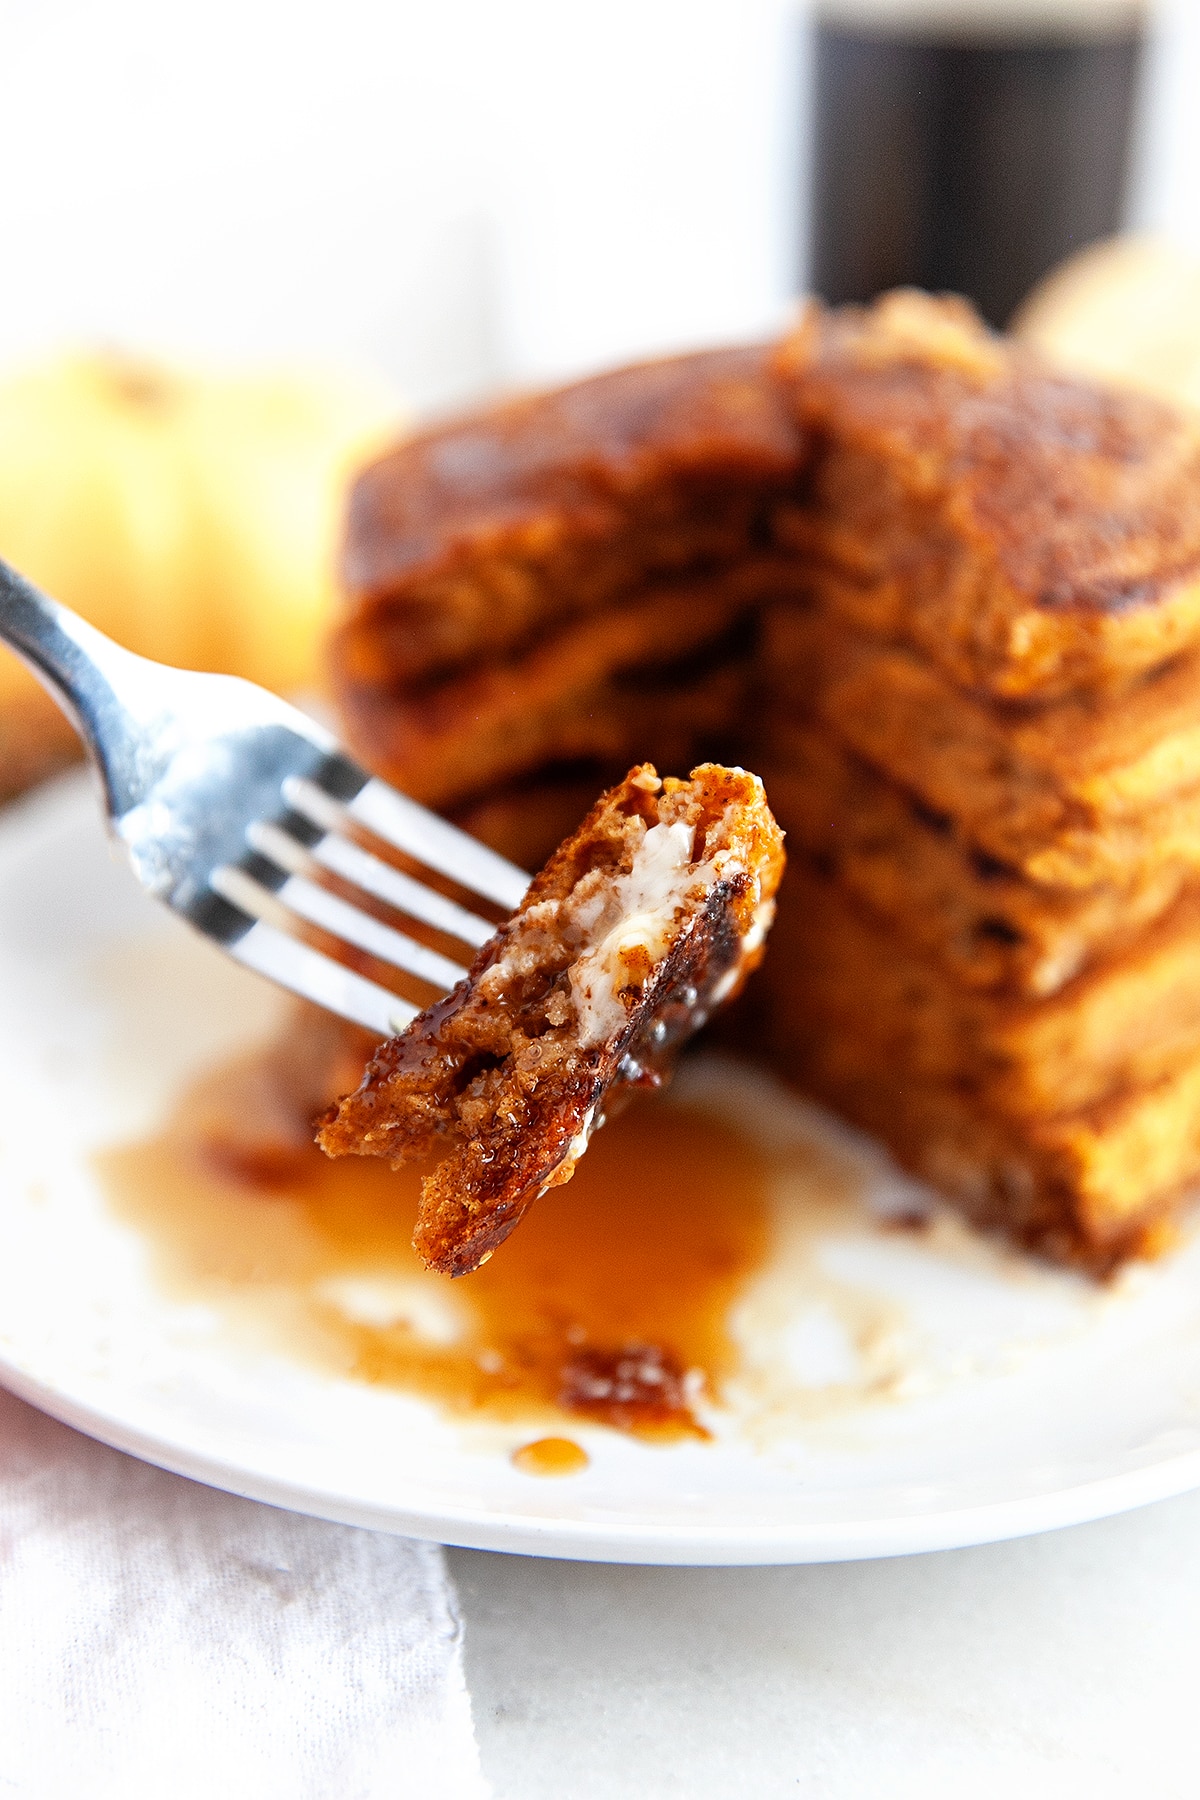 Showing a bite of pancake on a fork. 